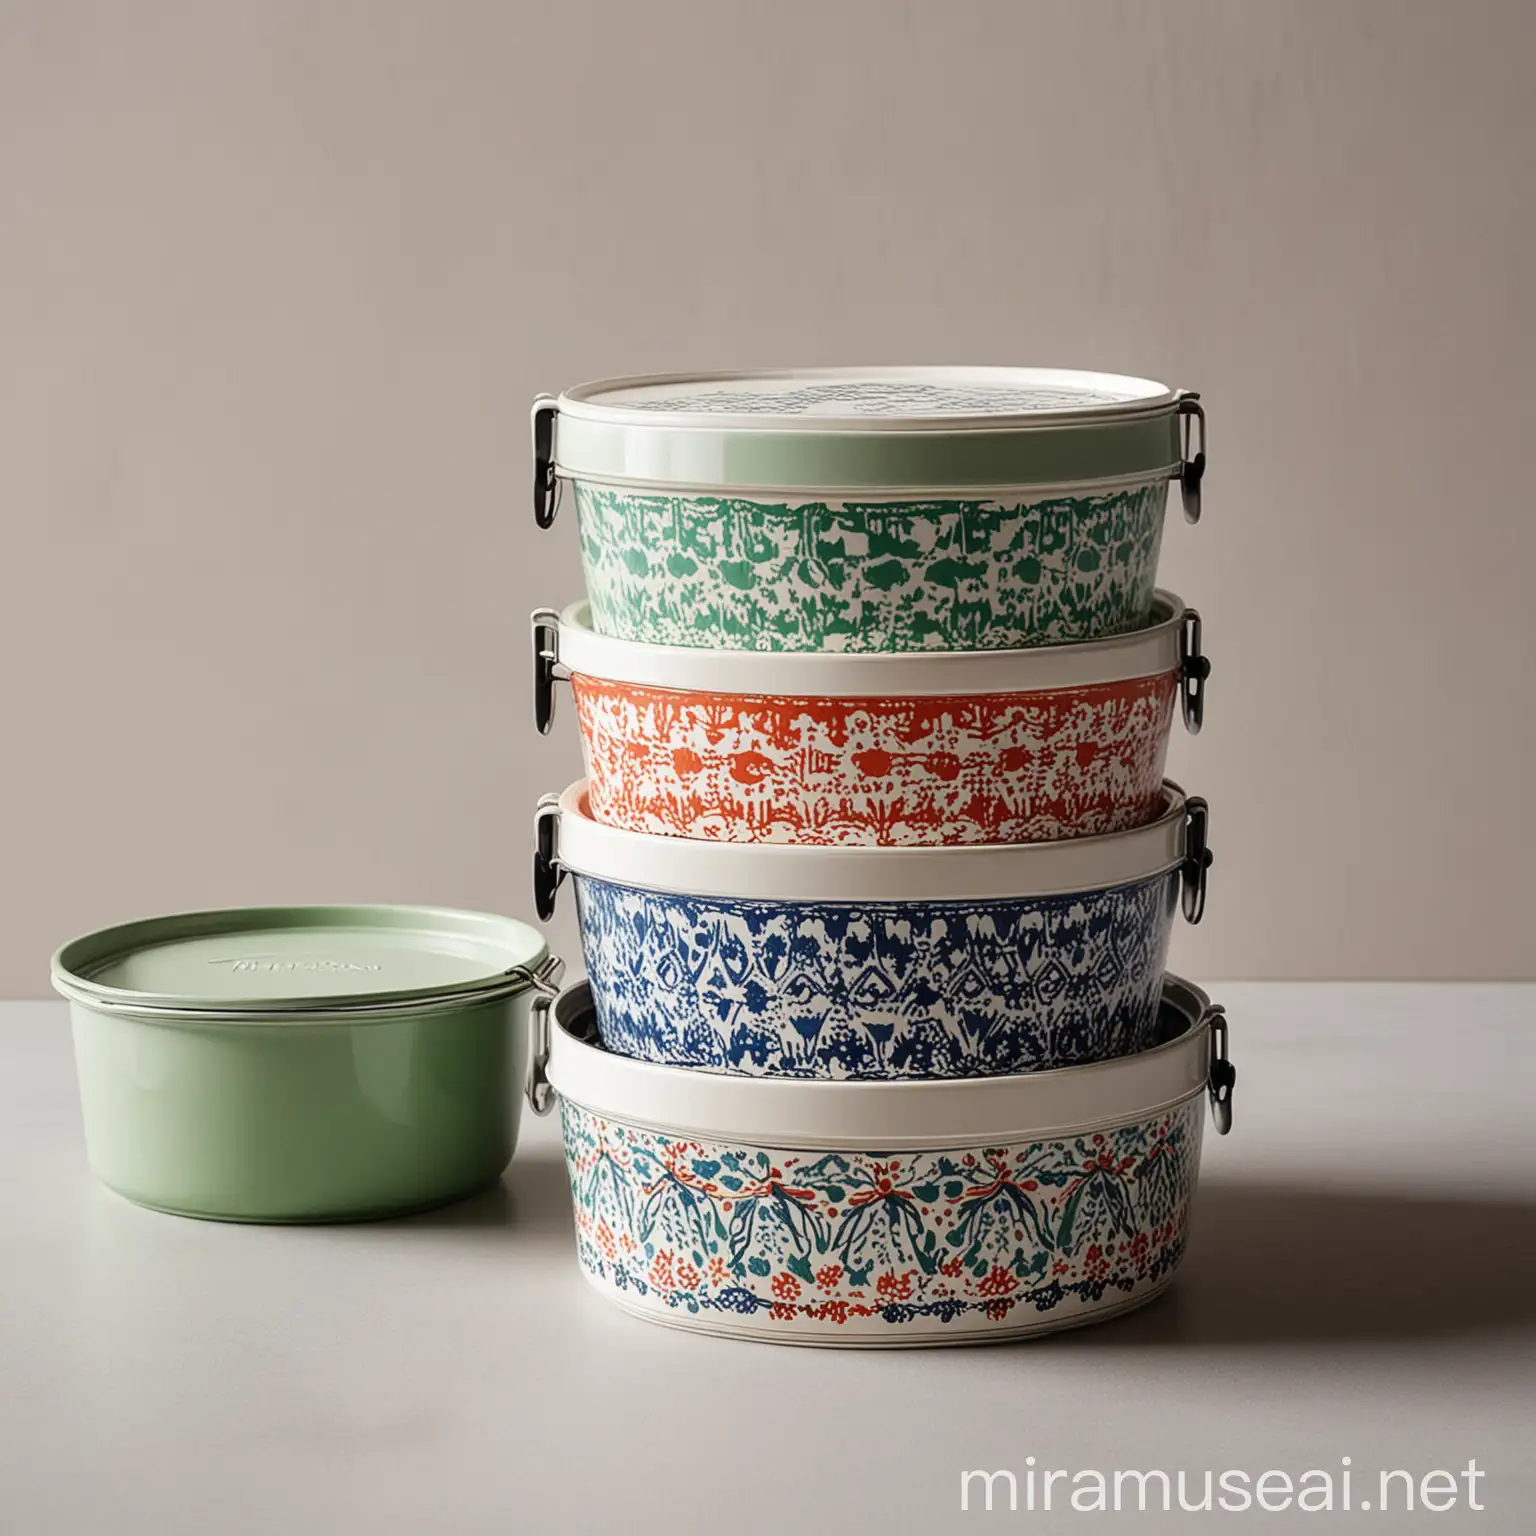 A tiffin design with cool modern western prints painted on it for the European market. the tiffin comes in different colours and patterns. Some have two containers and some have three. This design is very sleek and meant for food delivery. The brand name is sustainabowl